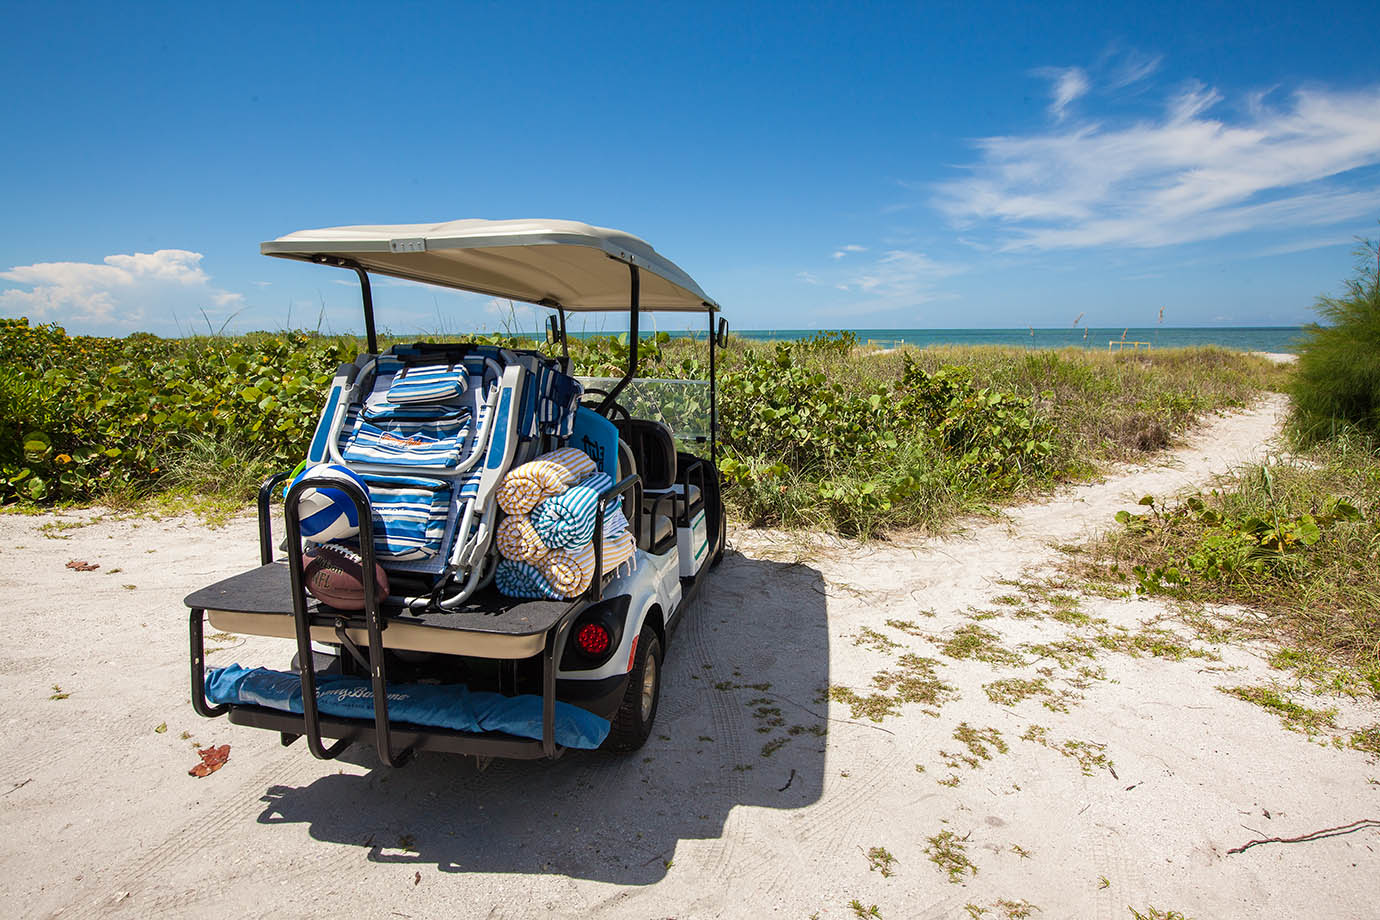 Golf cart on the beach dunes of Captiva Island, FL with beach chairs and towels in tow